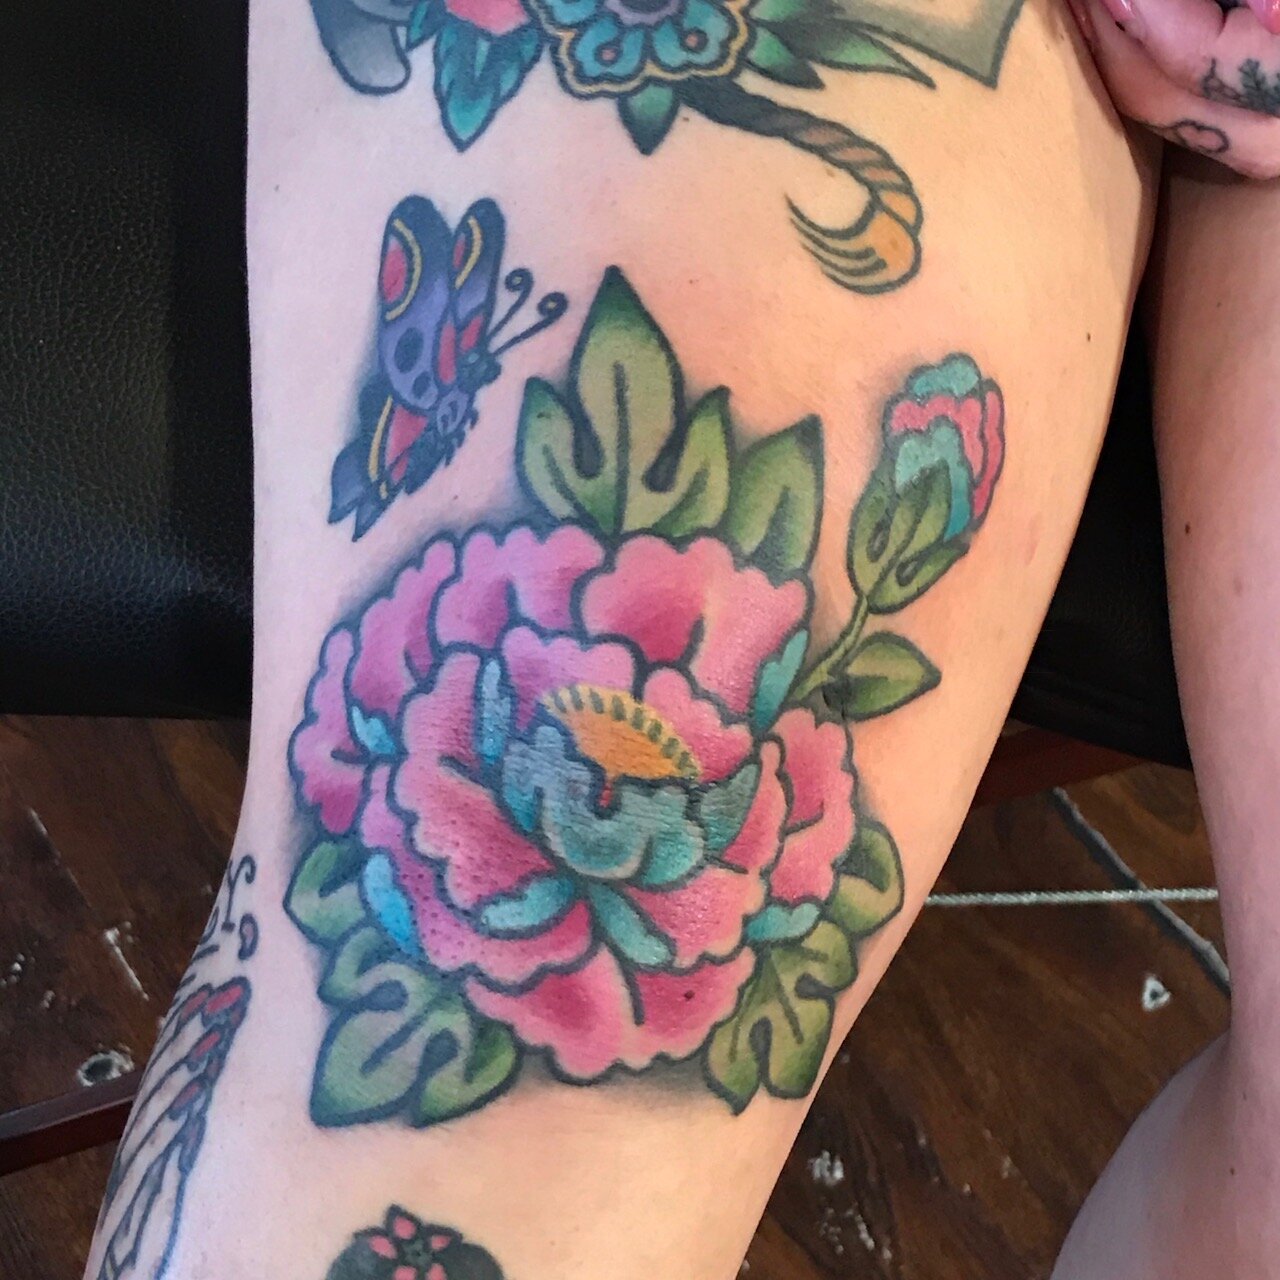 Flower tattoo in color by Josh Hanes at Southern Star Tattoo in Atlanta, Georgia